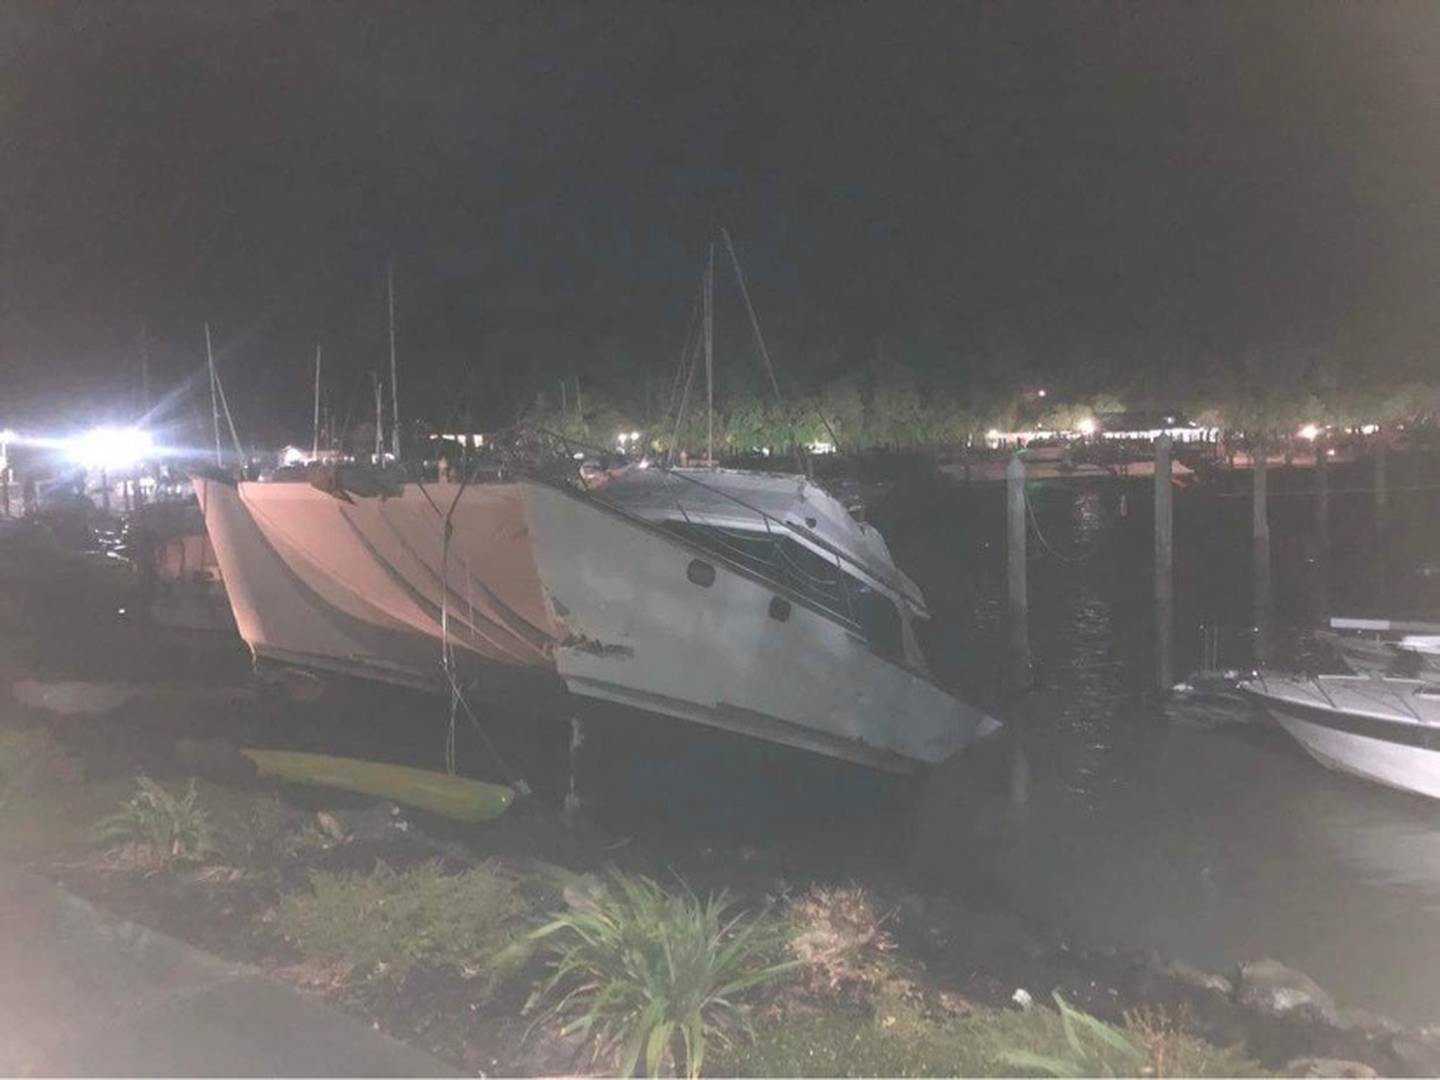 One Tutukaka local, whose boat was among those destroyed, was concerned he received no Civil Defence alert on his phone. Photo / Supplied